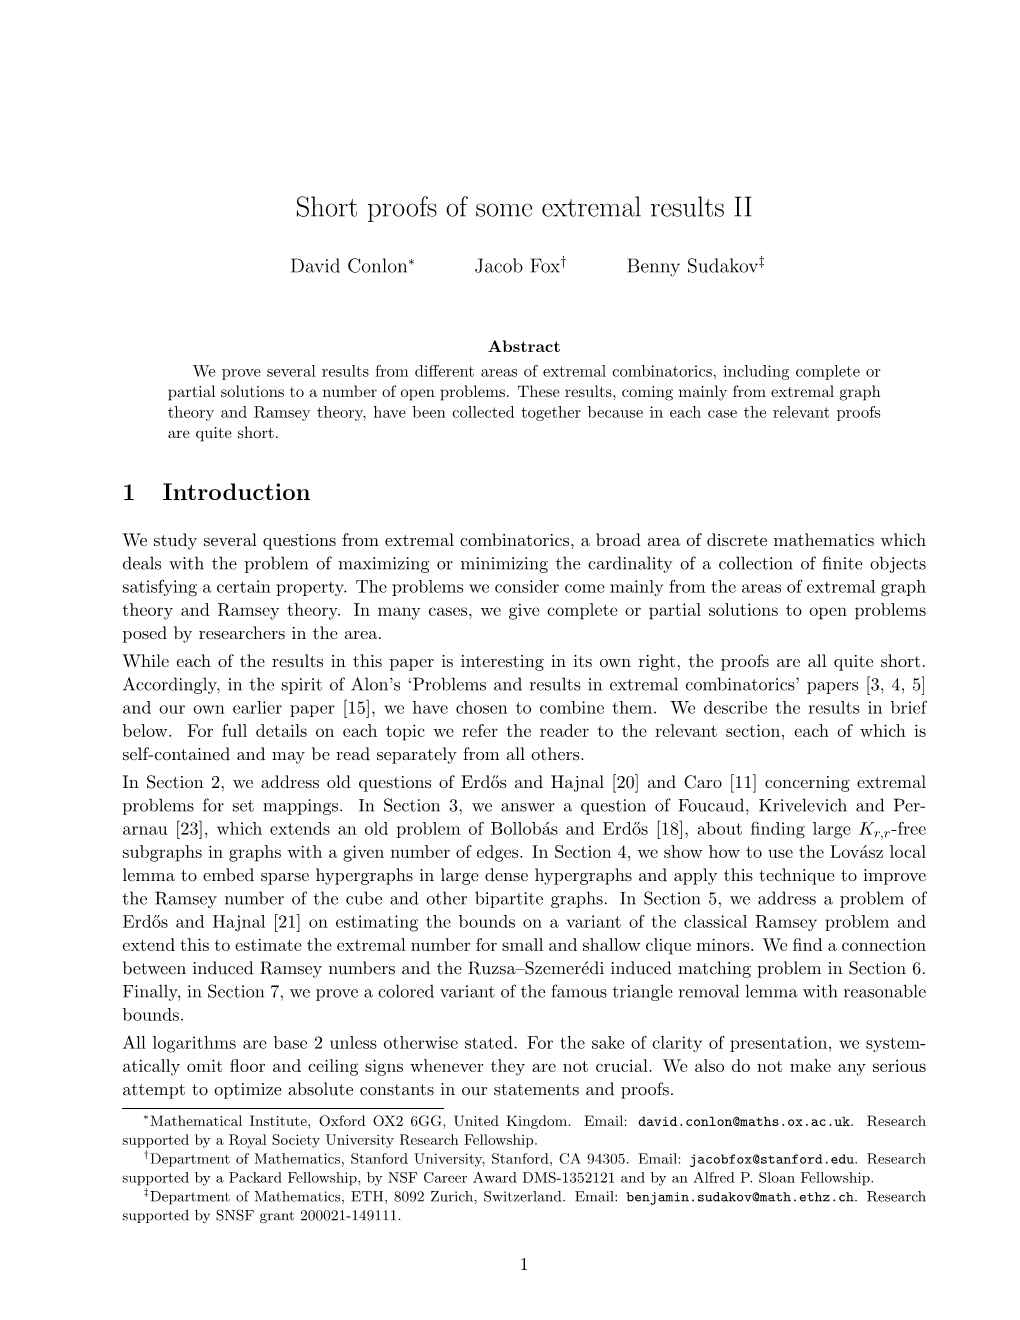 Short Proofs of Some Extremal Results II